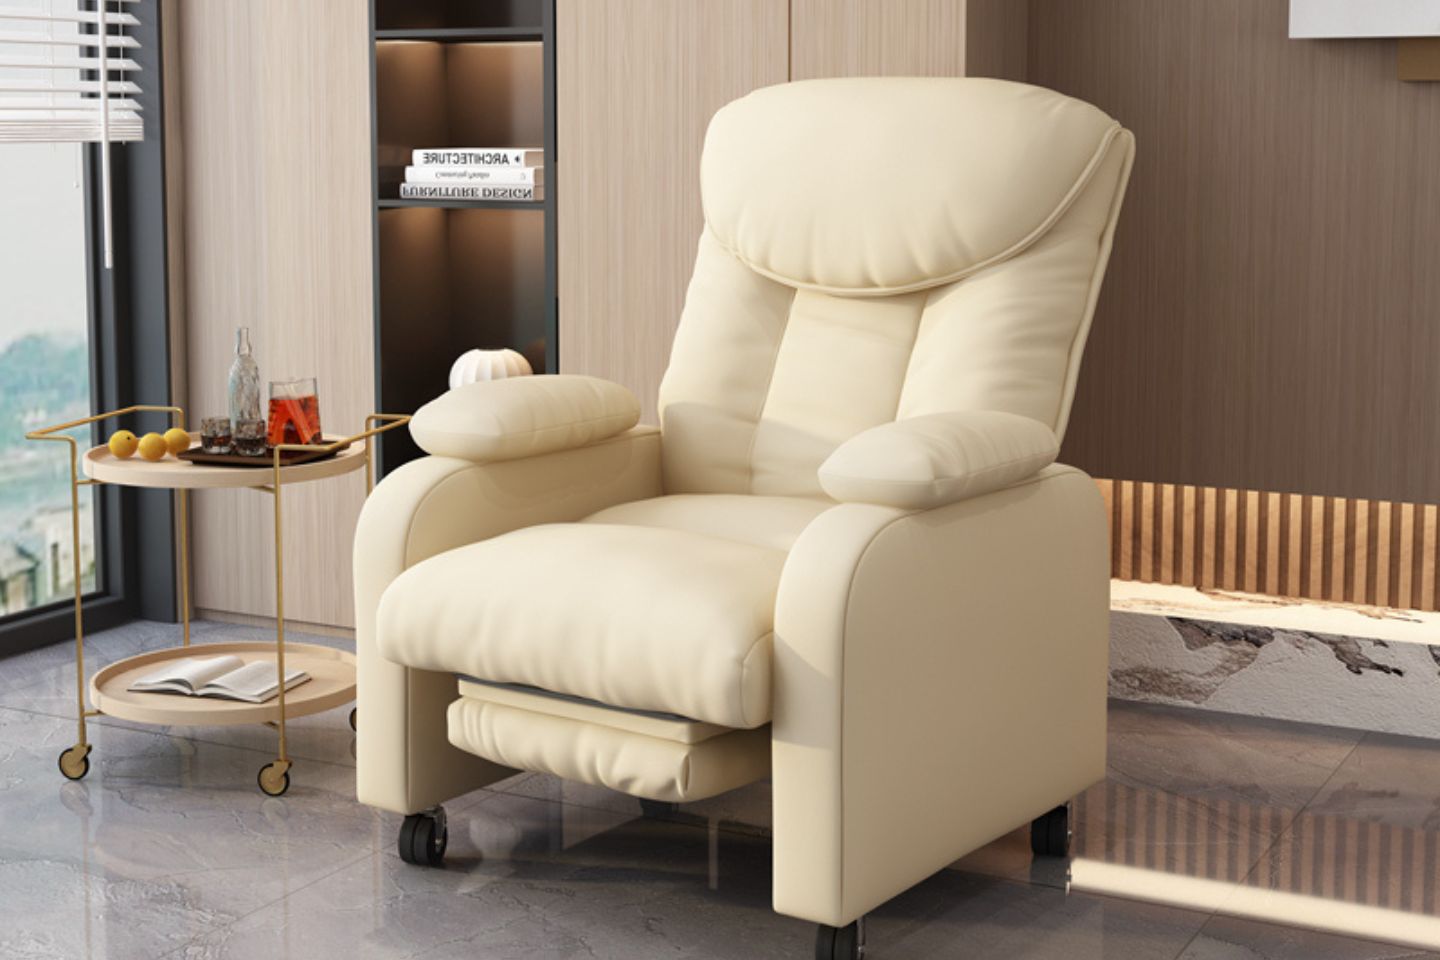 Can A Recliner Chair Help With Spinal Surgery Recovery?  : Ultimate Guide